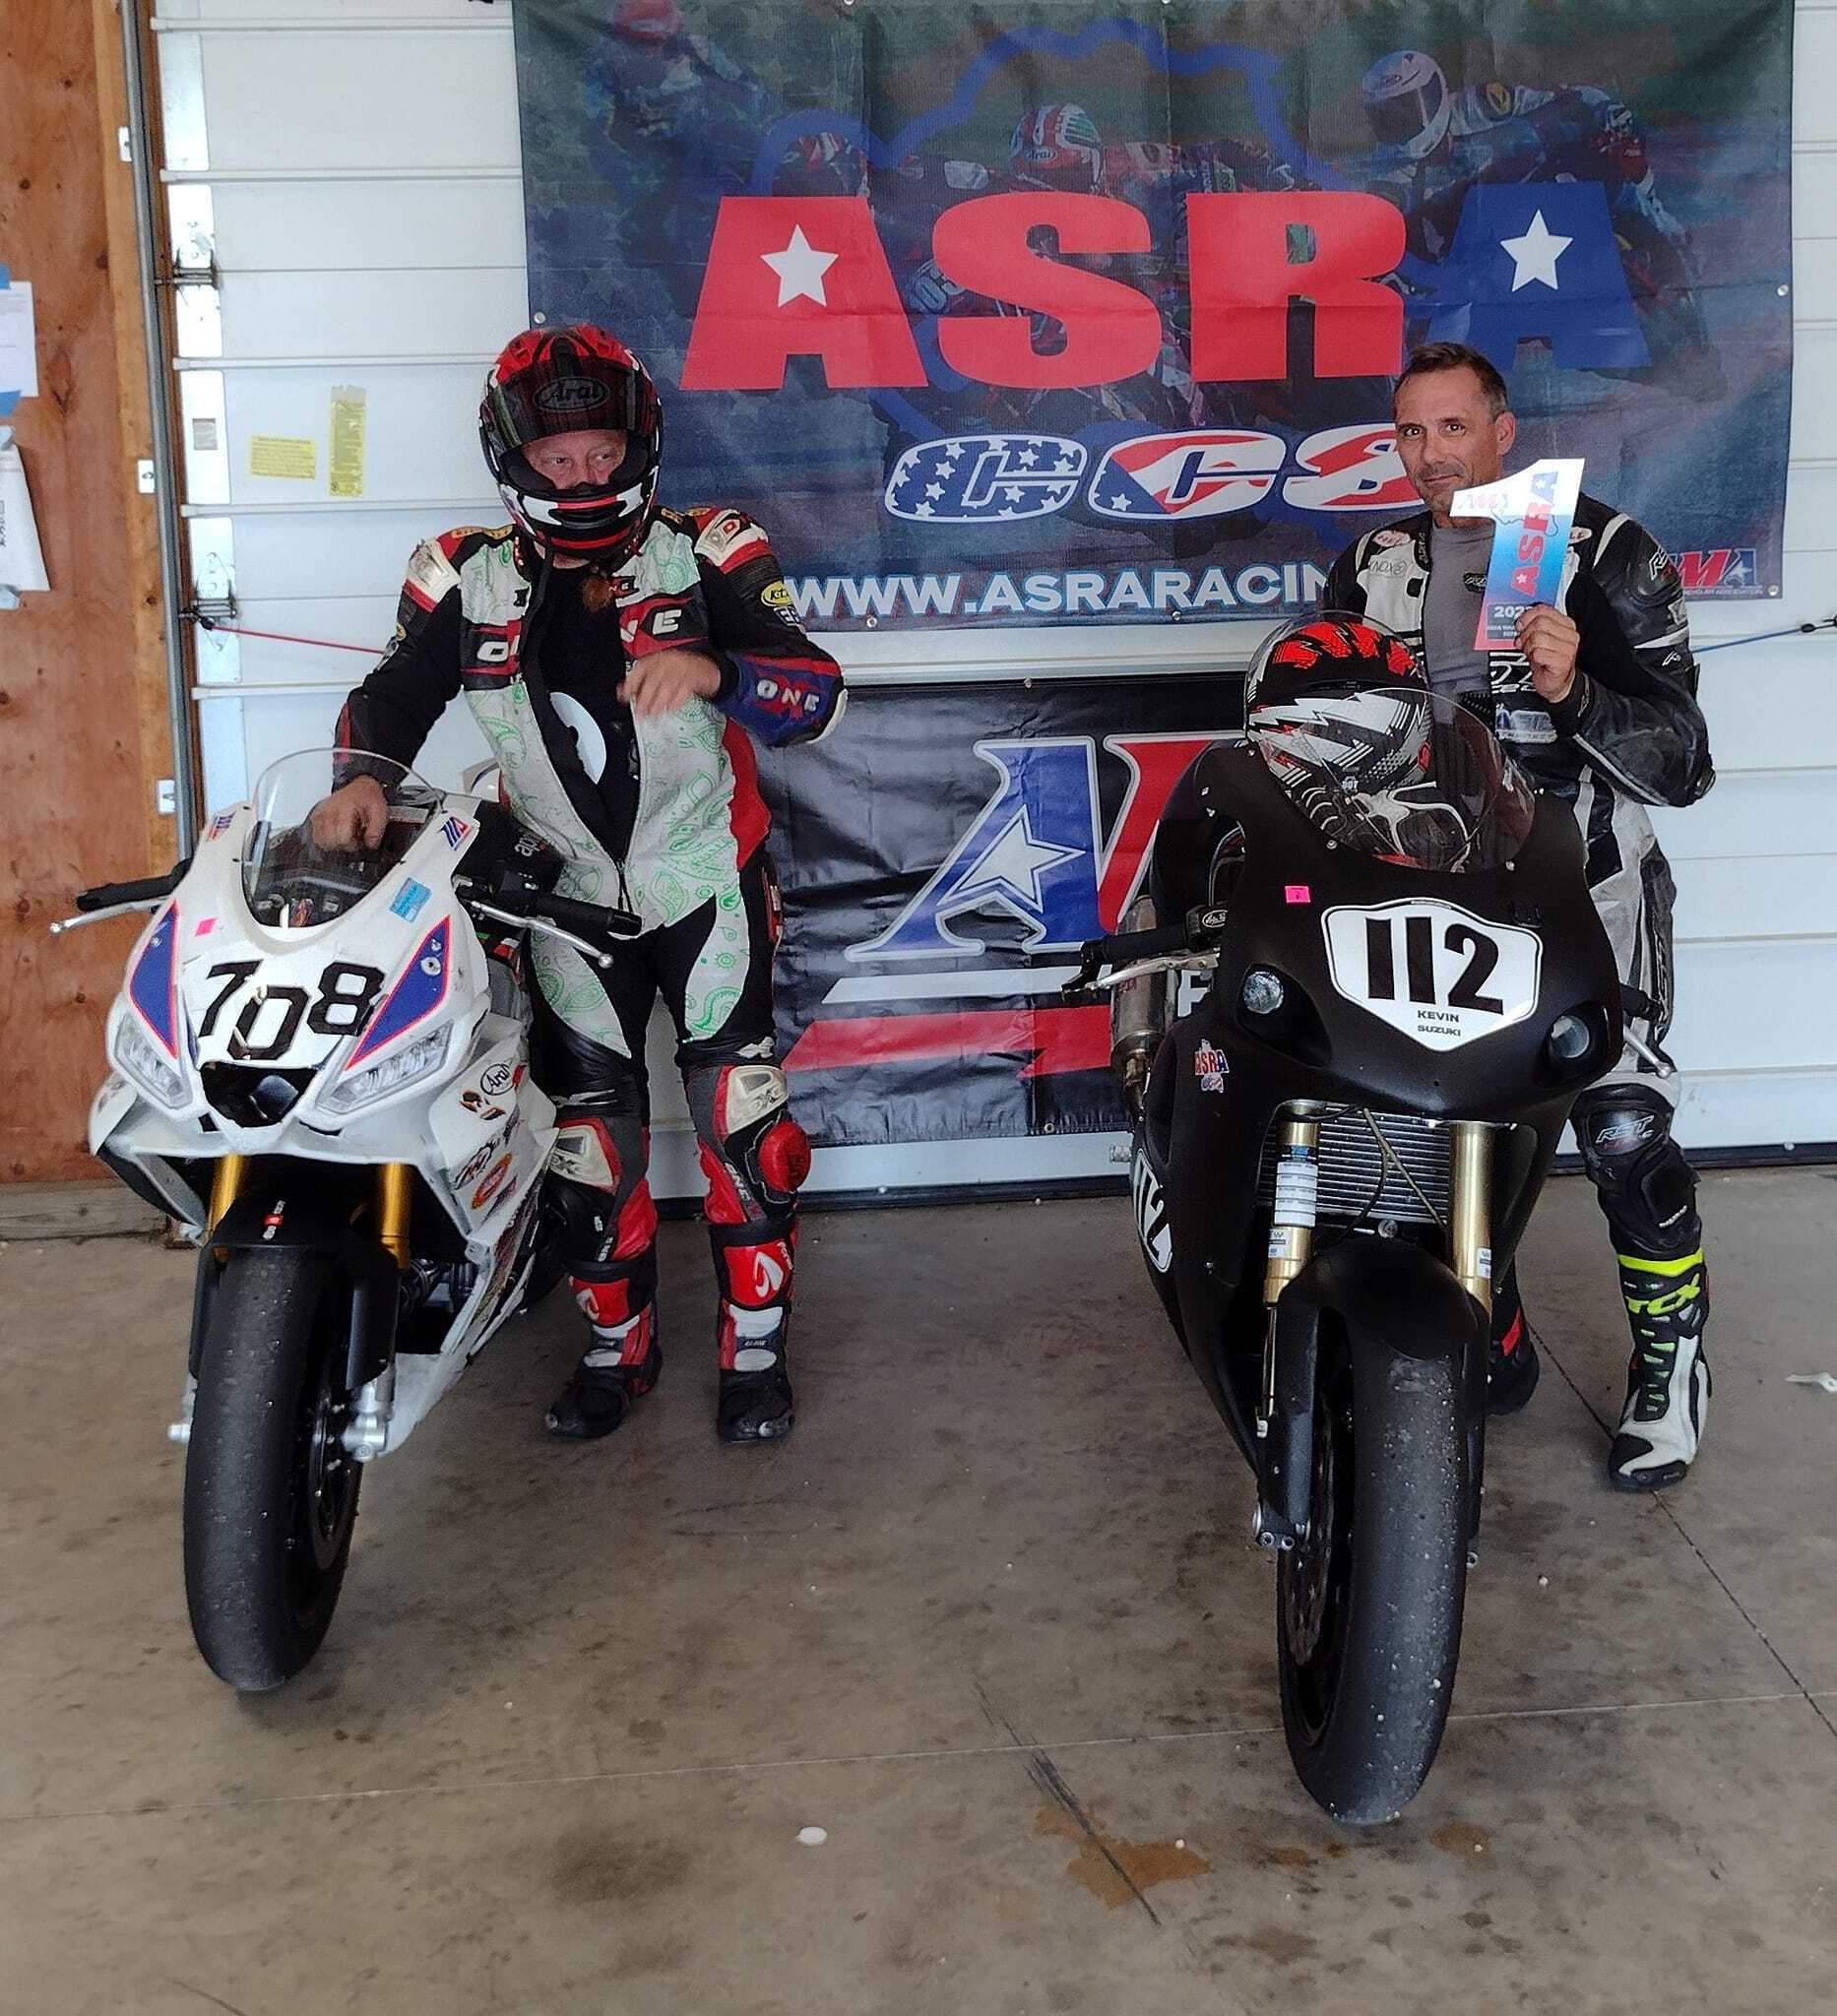 Read more about the article Getting Into Motorcycle Racing: A Step-by-Step Guide